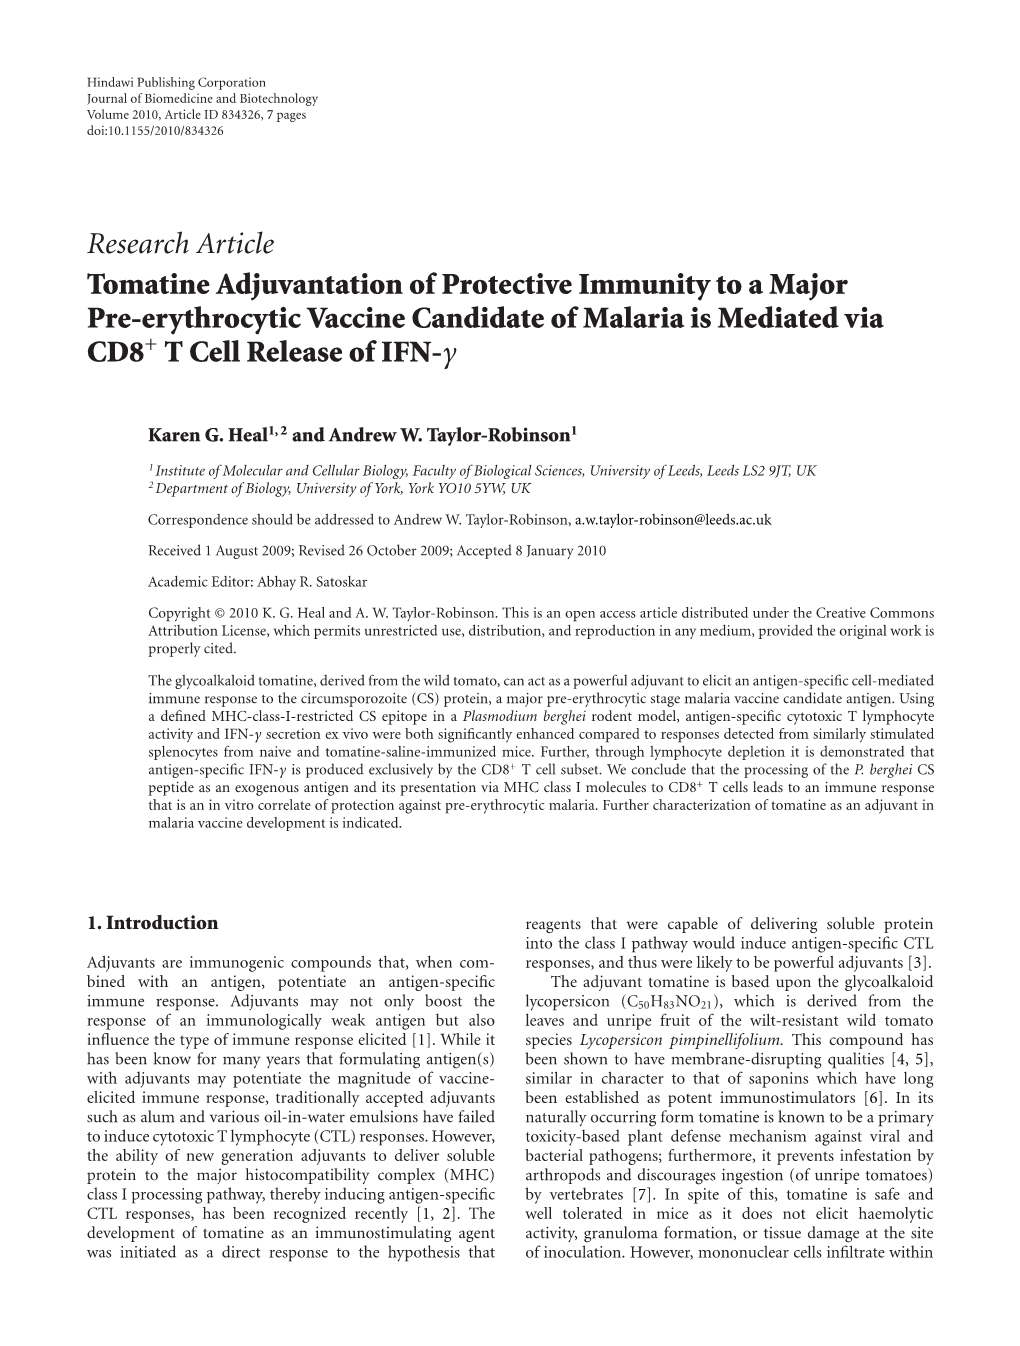 Research Article Tomatine Adjuvantation of Protective Immunity to a Major Pre-Erythrocytic Vaccine Candidate of Malaria Is Mediated Via CD8+ T Cell Release of IFN-Γ